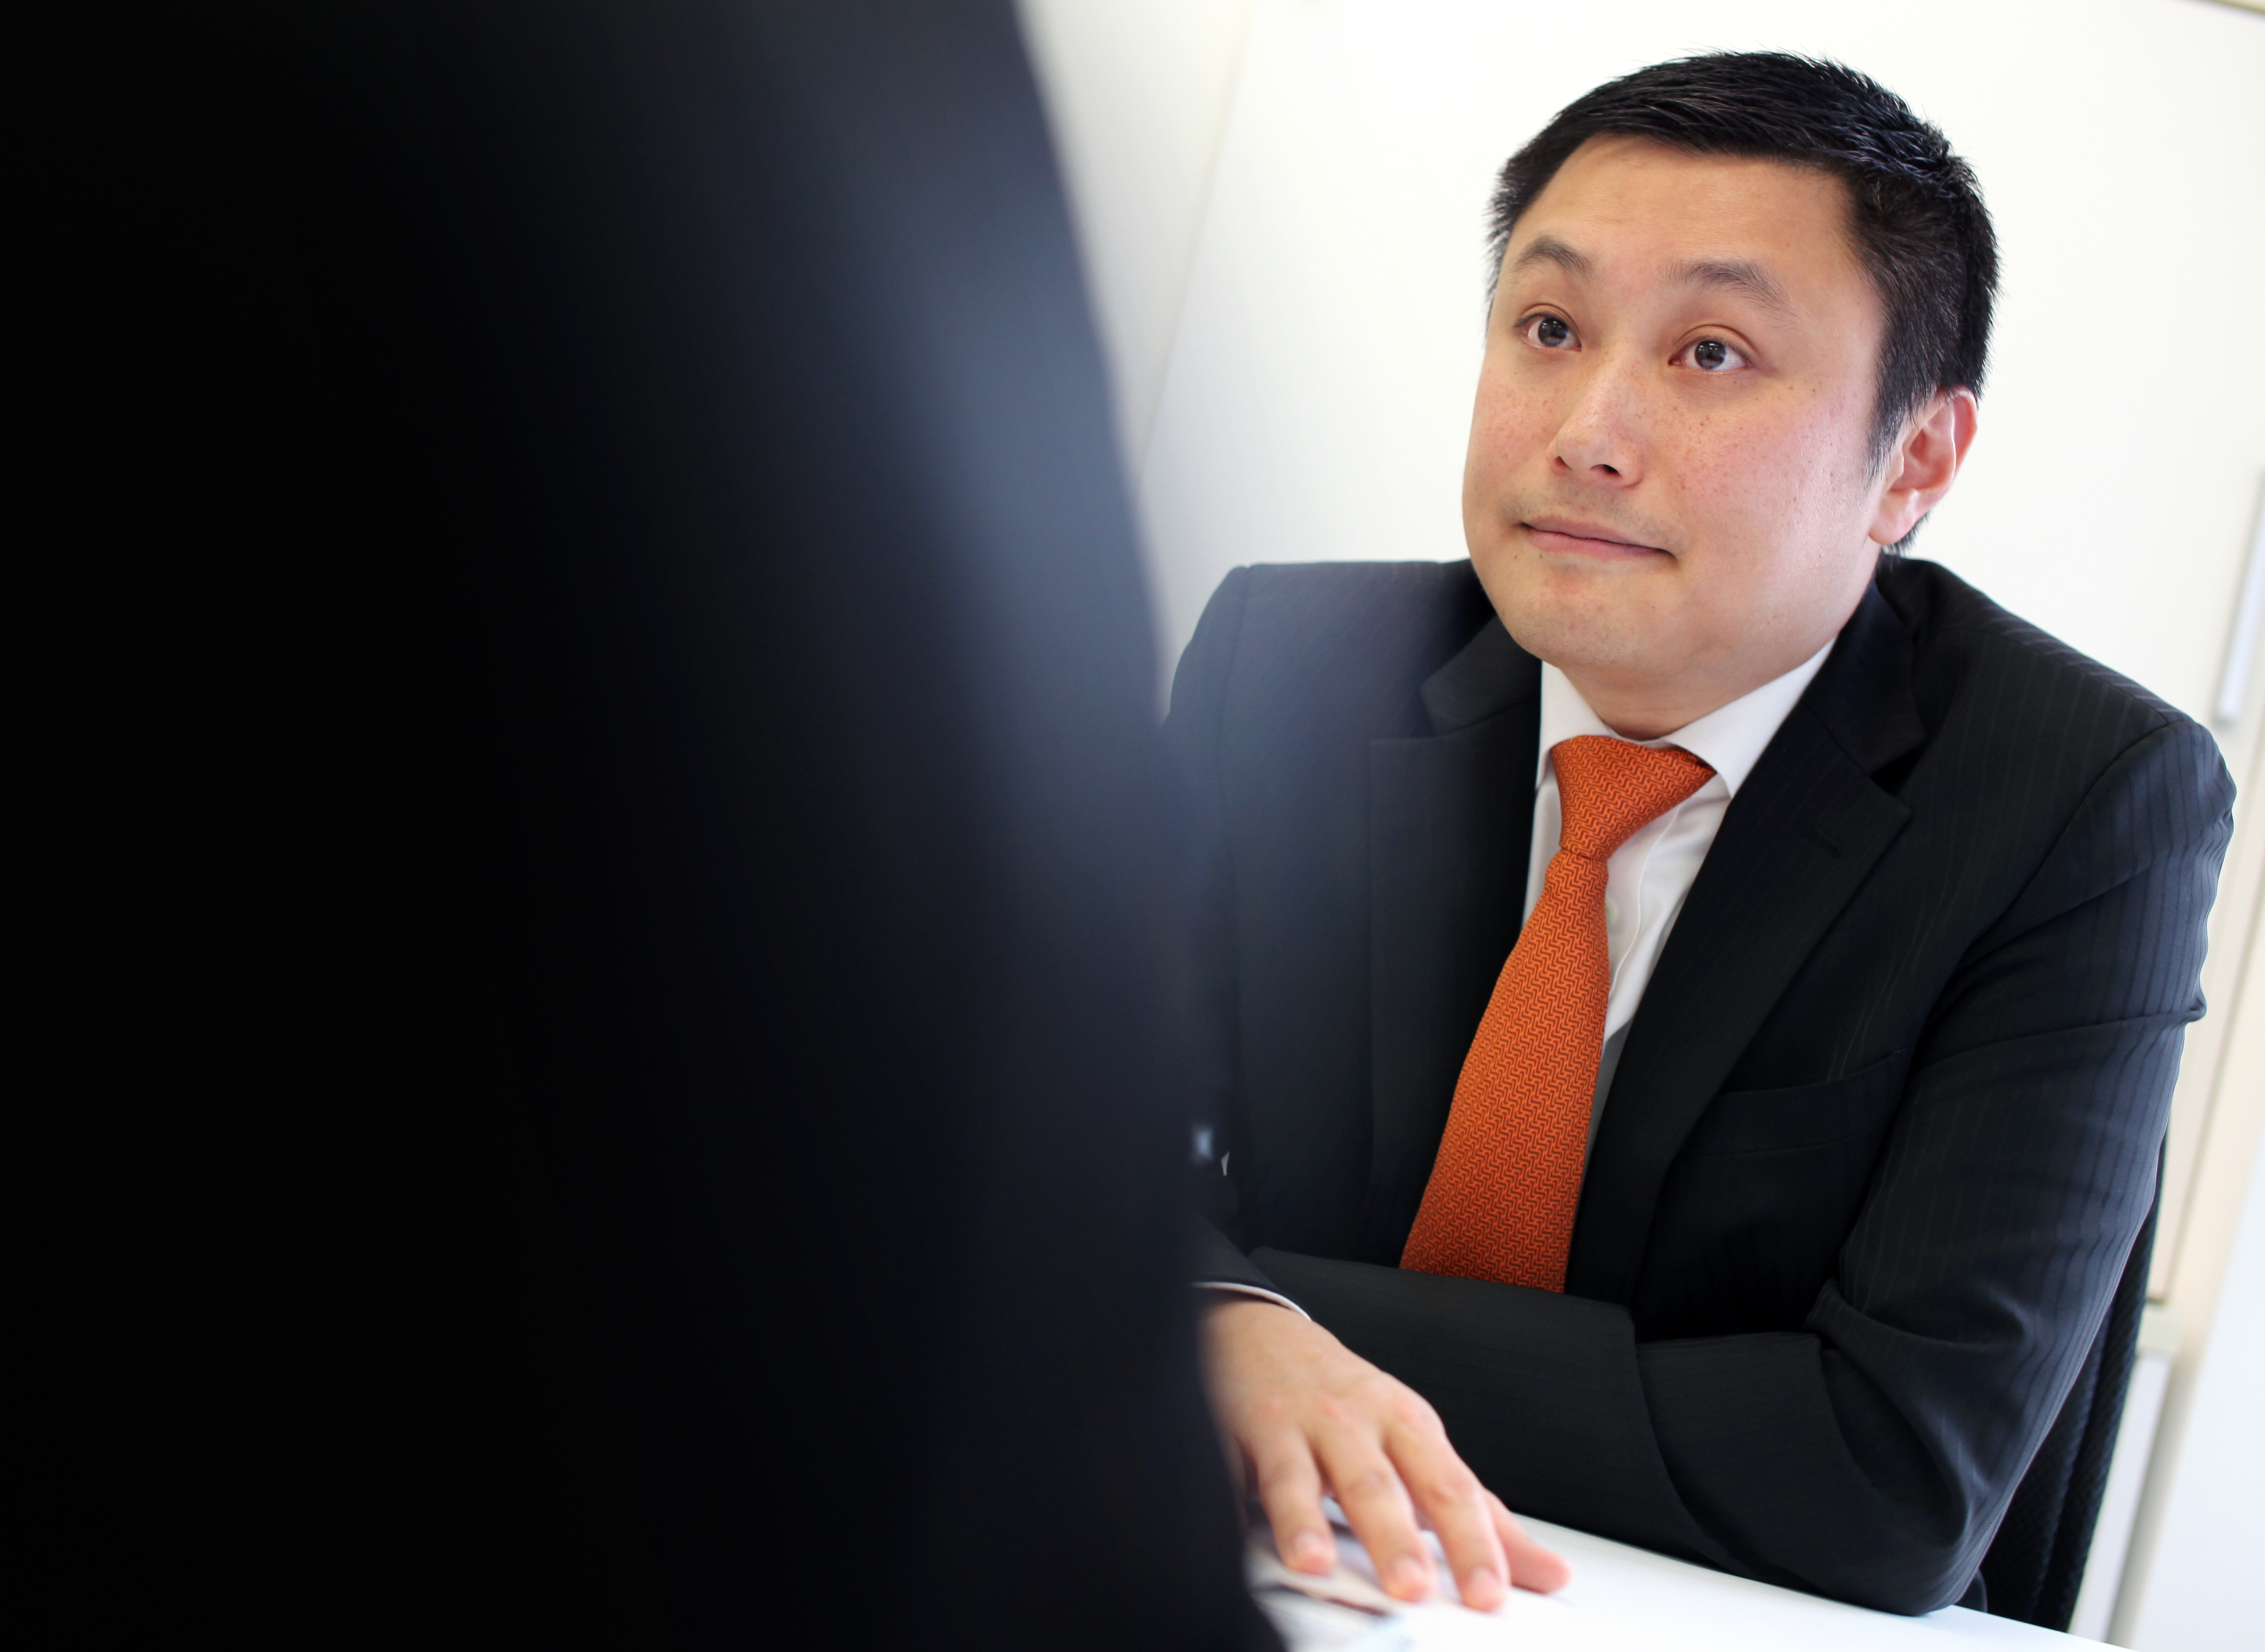 Interview of Simon Loong Pui-chi, CEO and Founder of WeLab Limited, in Sheung Wan. 27FEB14